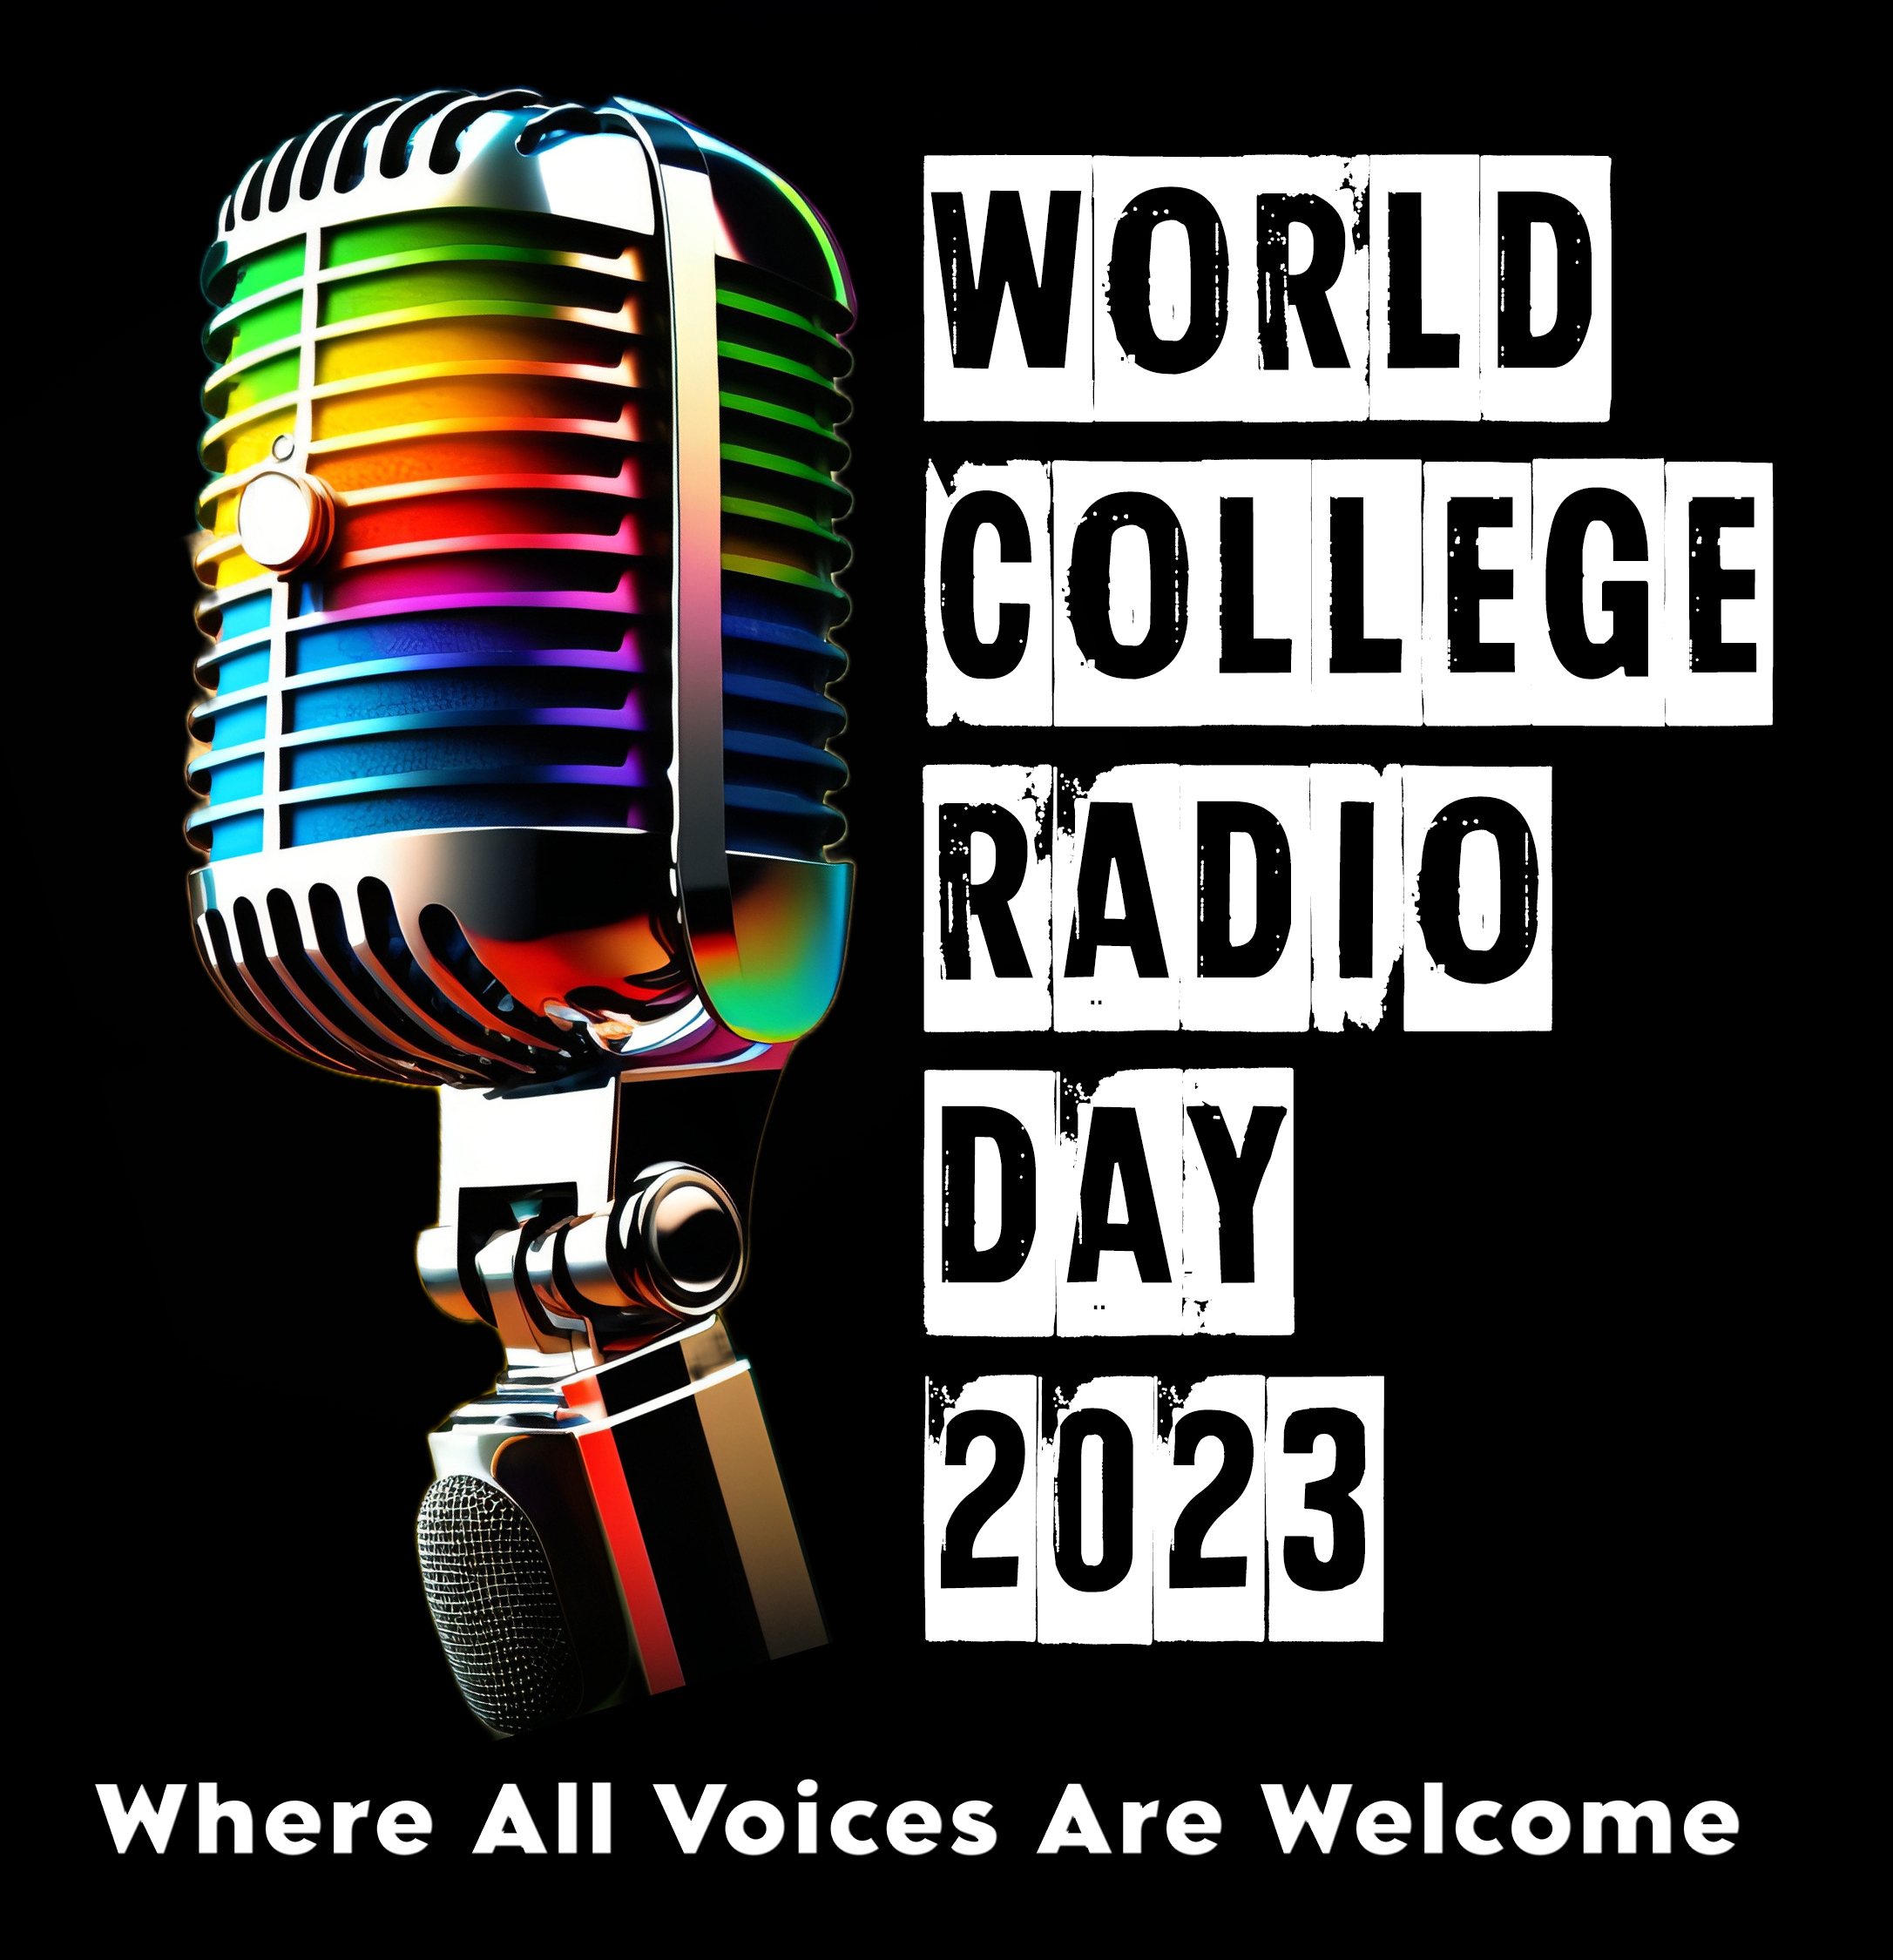 World College Radio Day 2023 Announced for October 6: “Where All Voices Are Welcome”